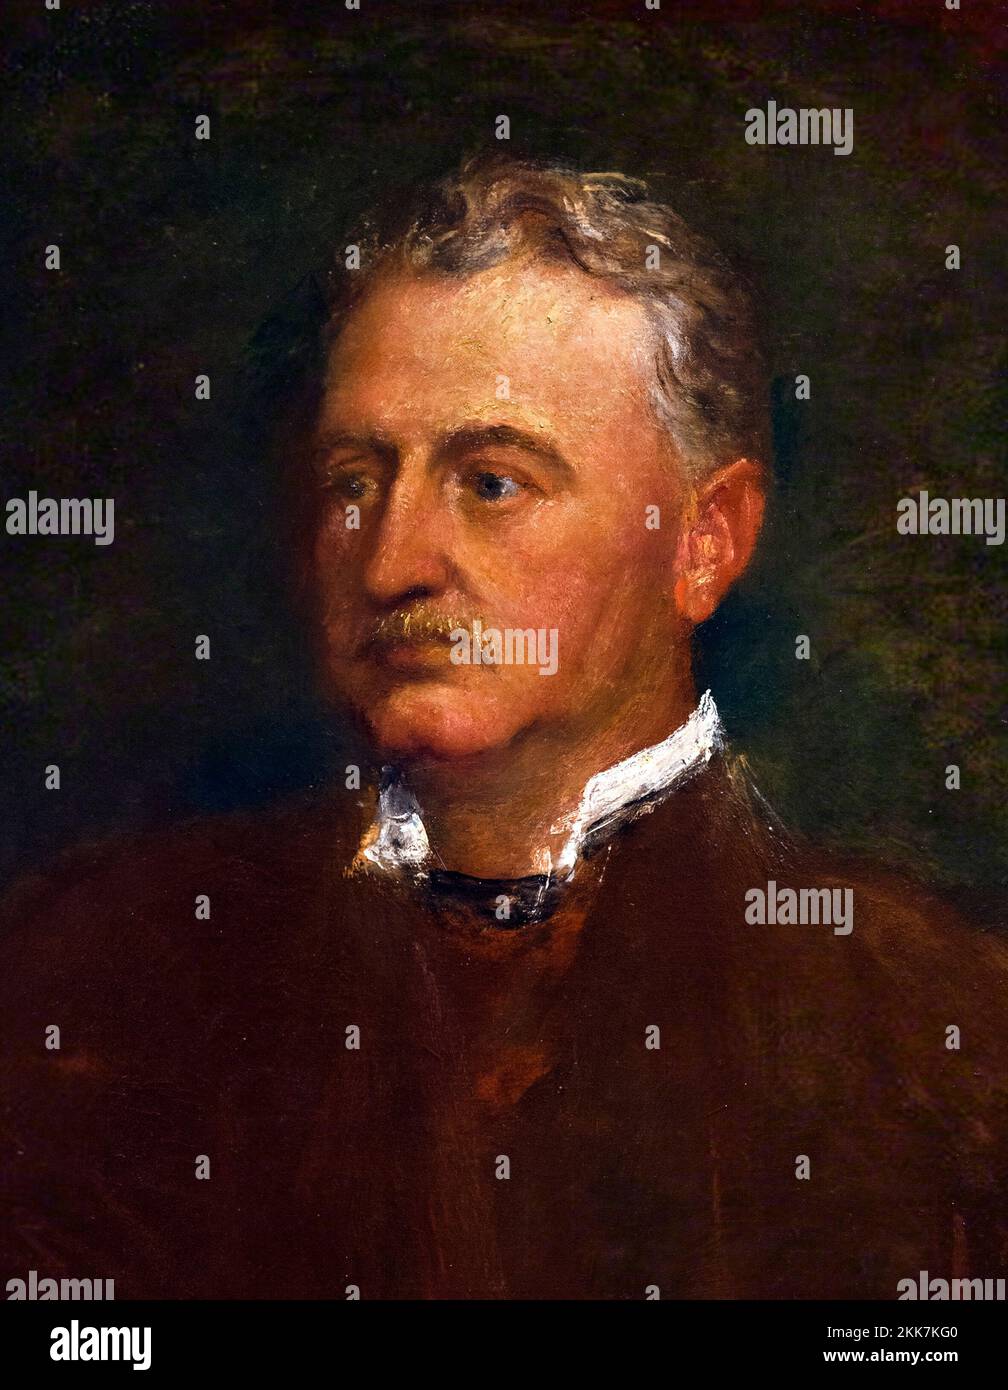 Cecil Rhodes. Portrait of Cecil John Rhodes (1853-1902) by George Frederic Watts (1817-1904), oil on canvas, 1898. Stock Photo